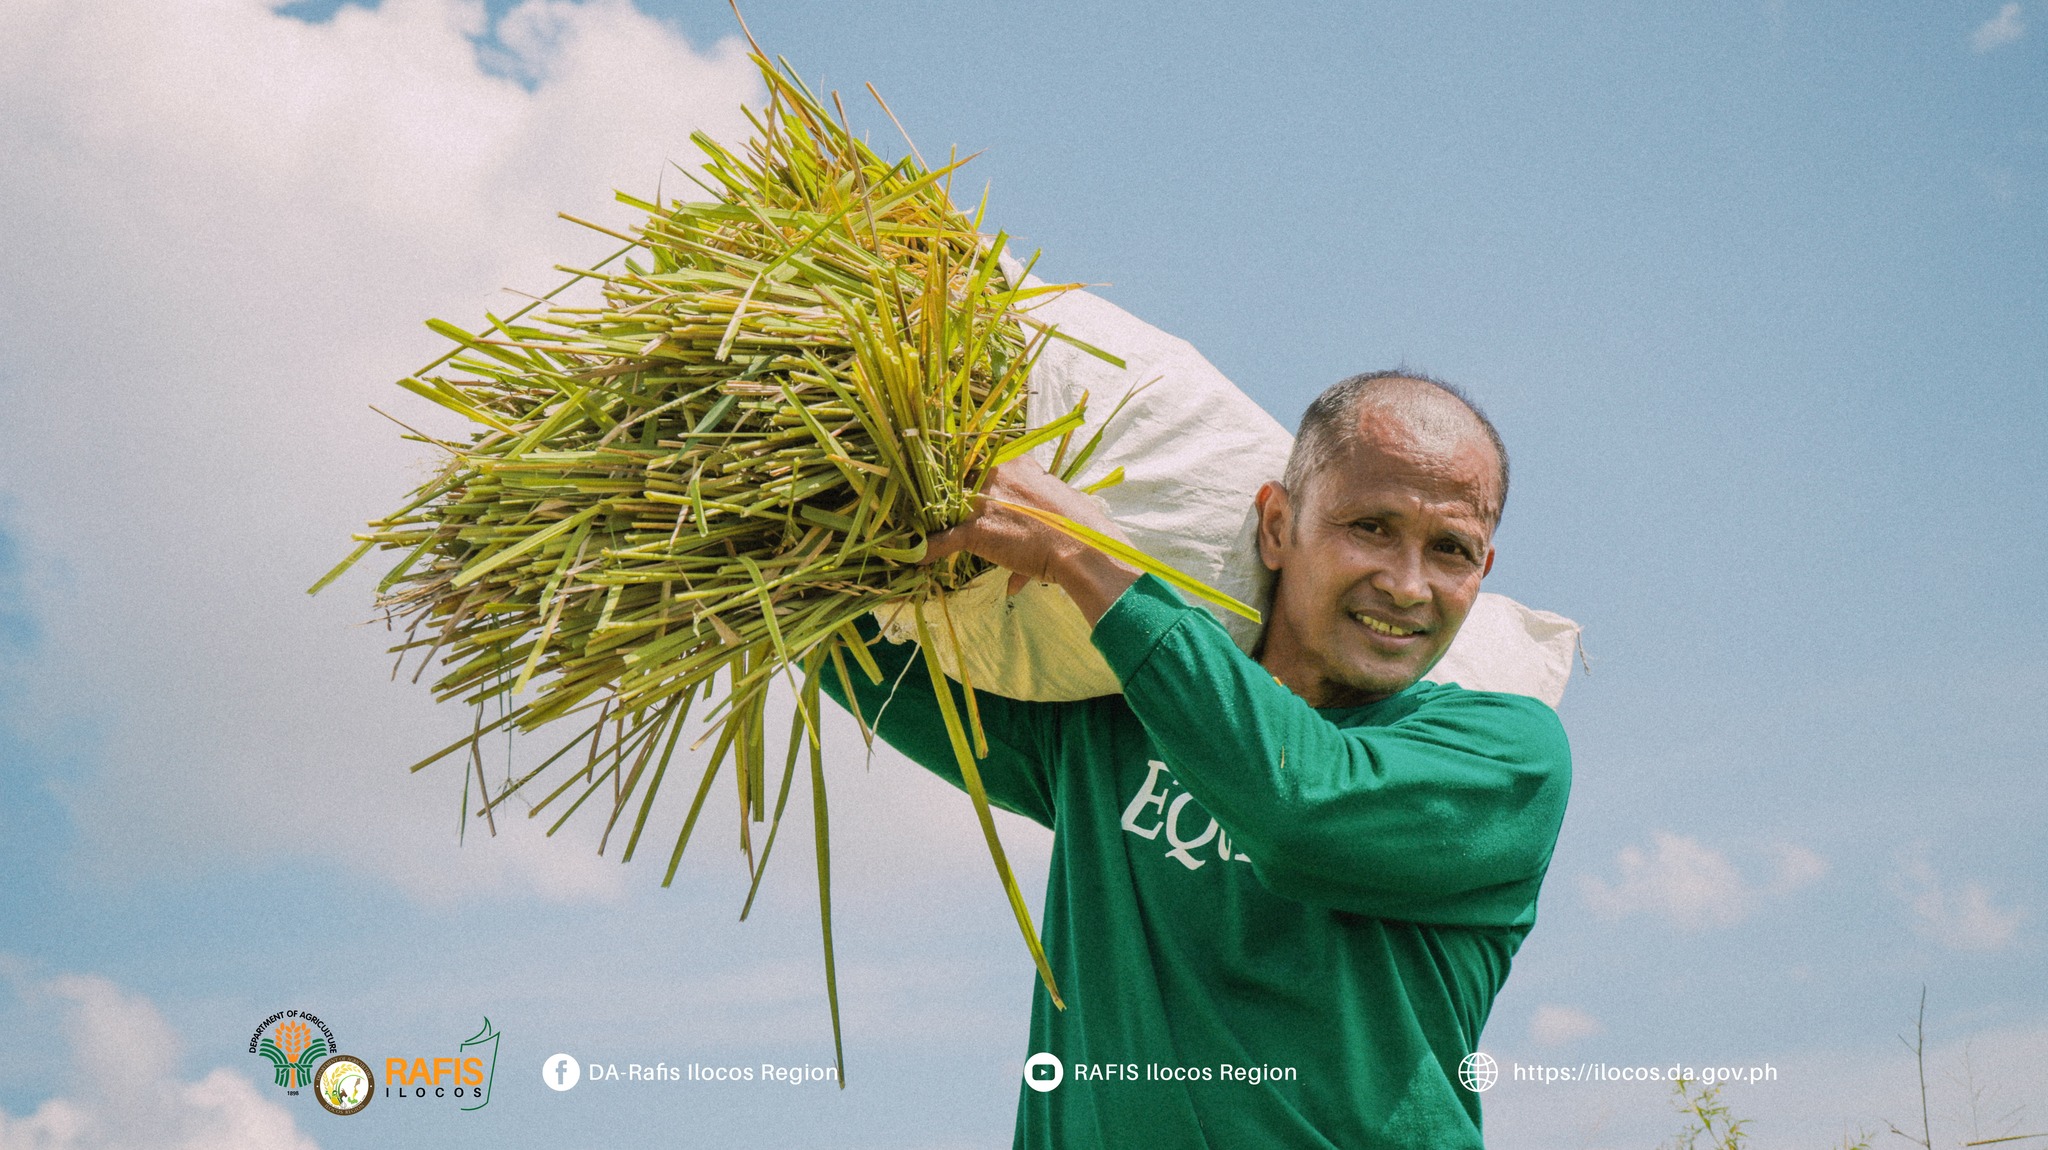 Stories from the field: The joy in farming rice